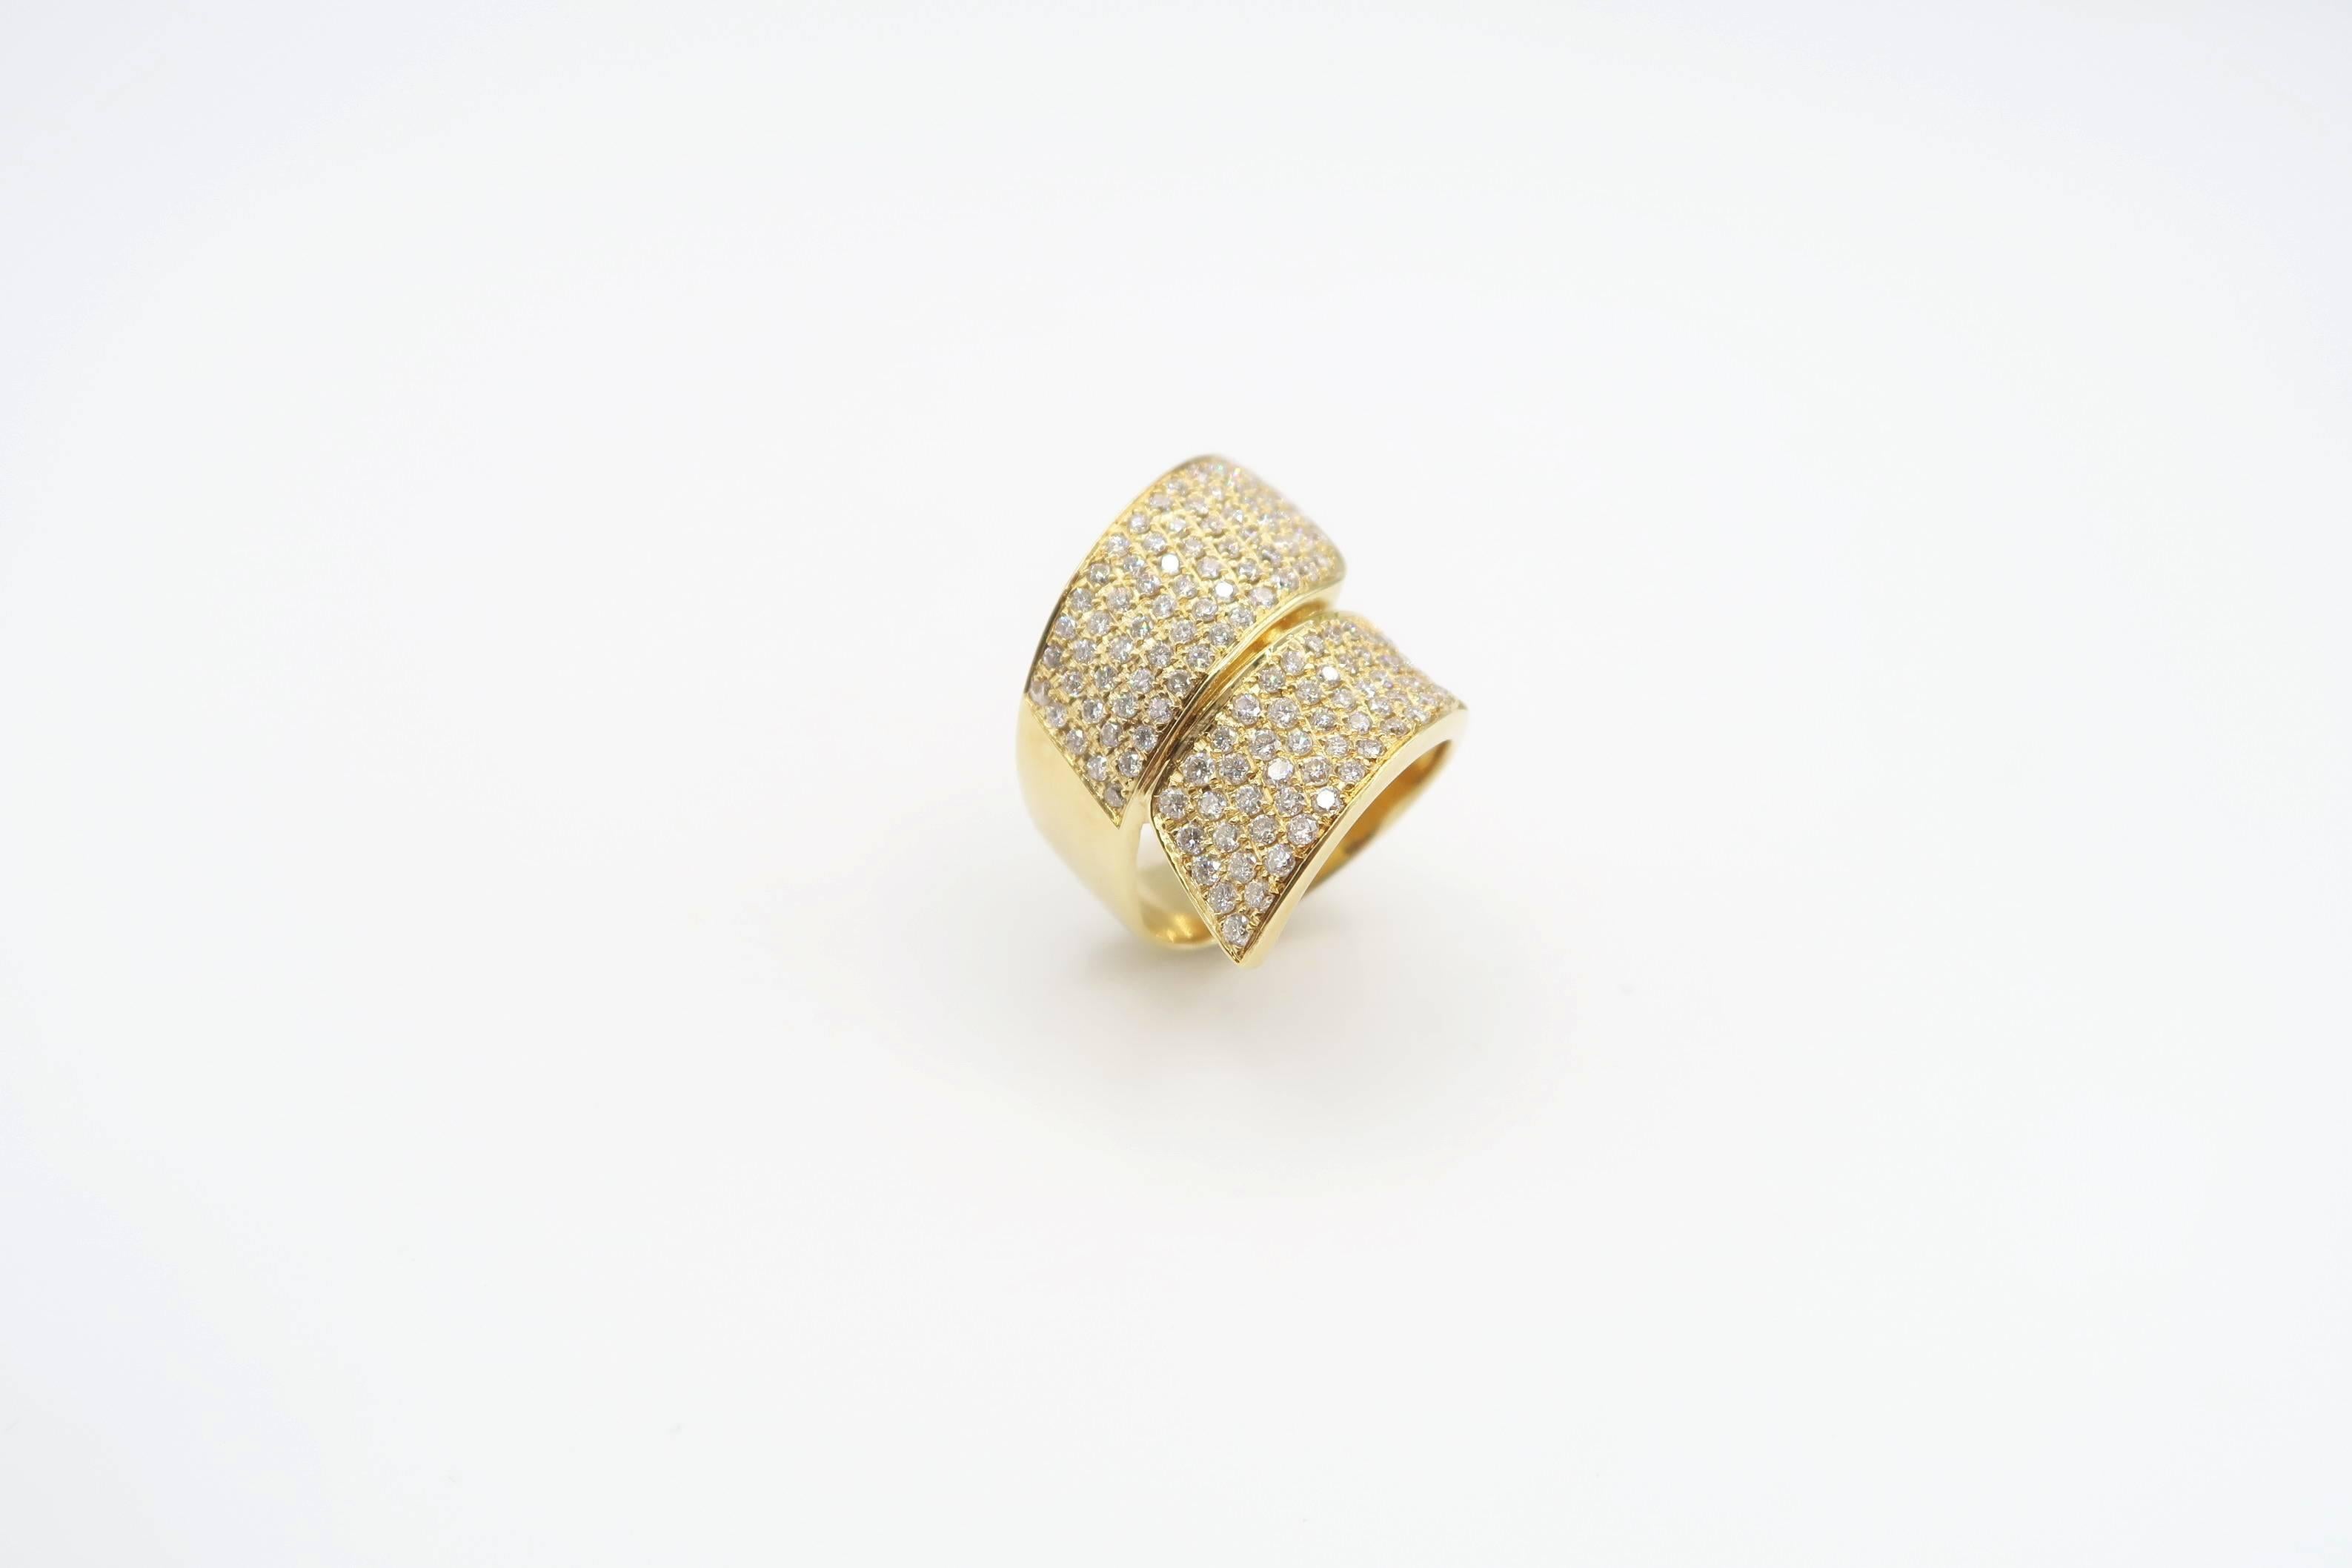 BOON Cross Pavé Diamond 18K Yellow Gold Ring

Should you wish to have the ring resized, please kindly let us know upon checkout.

Size: 52 / US 6 / UK L
Height: 2.5 cm

Diamond: 1.42 ct
Gold: 13.036 g